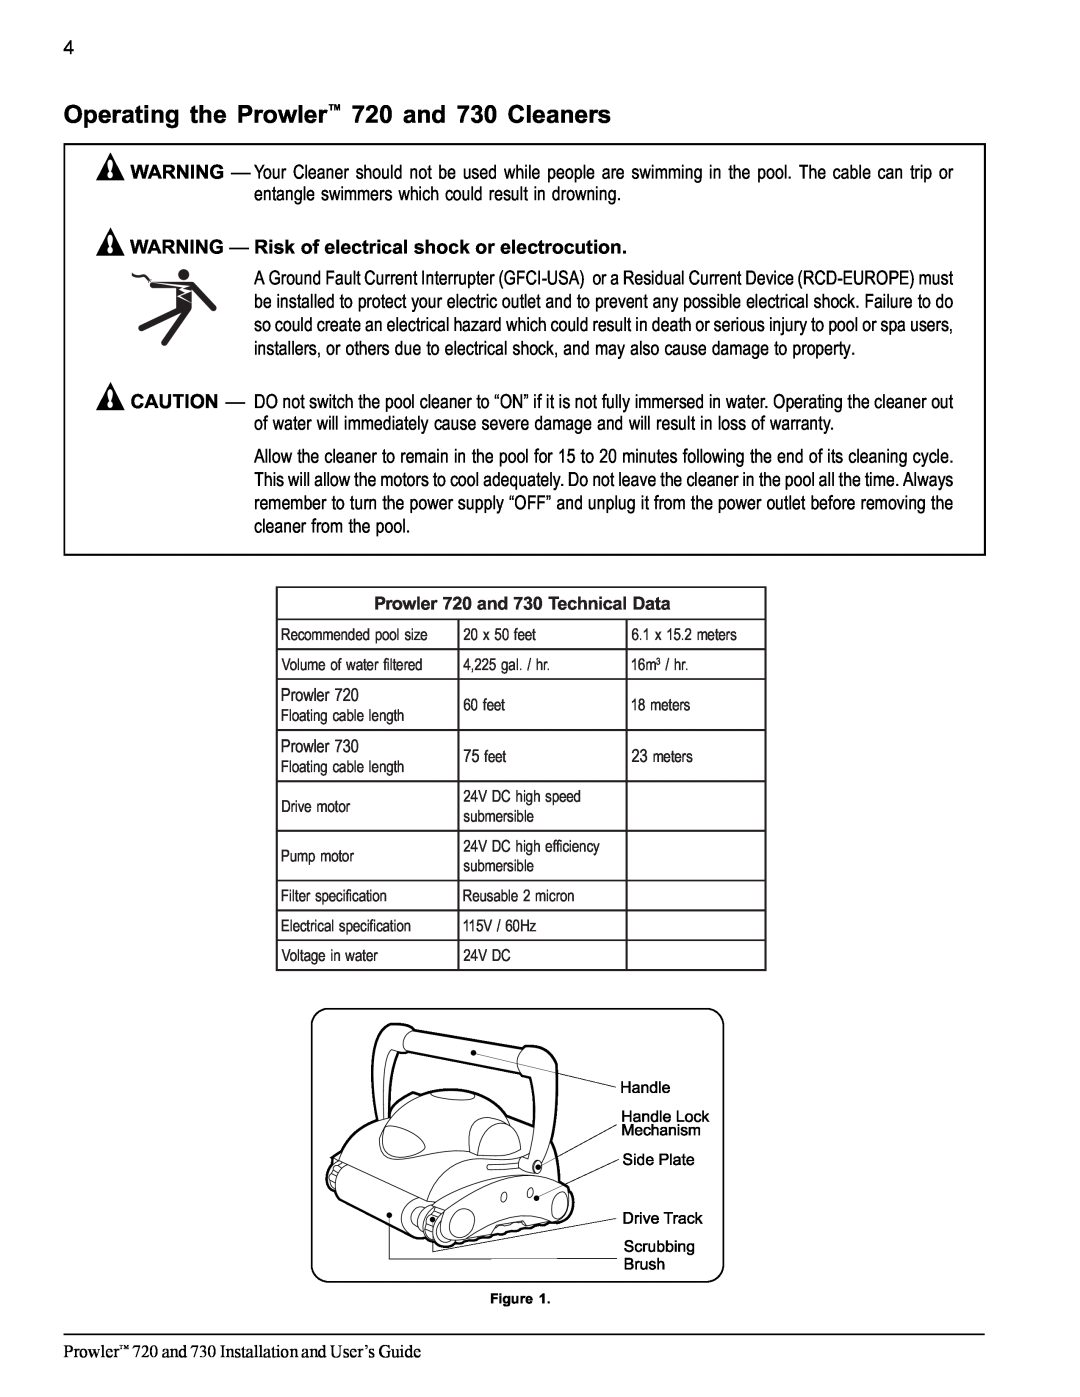 Pentair important safety instructions Operating the Prowler 720 and 730 Cleaners 